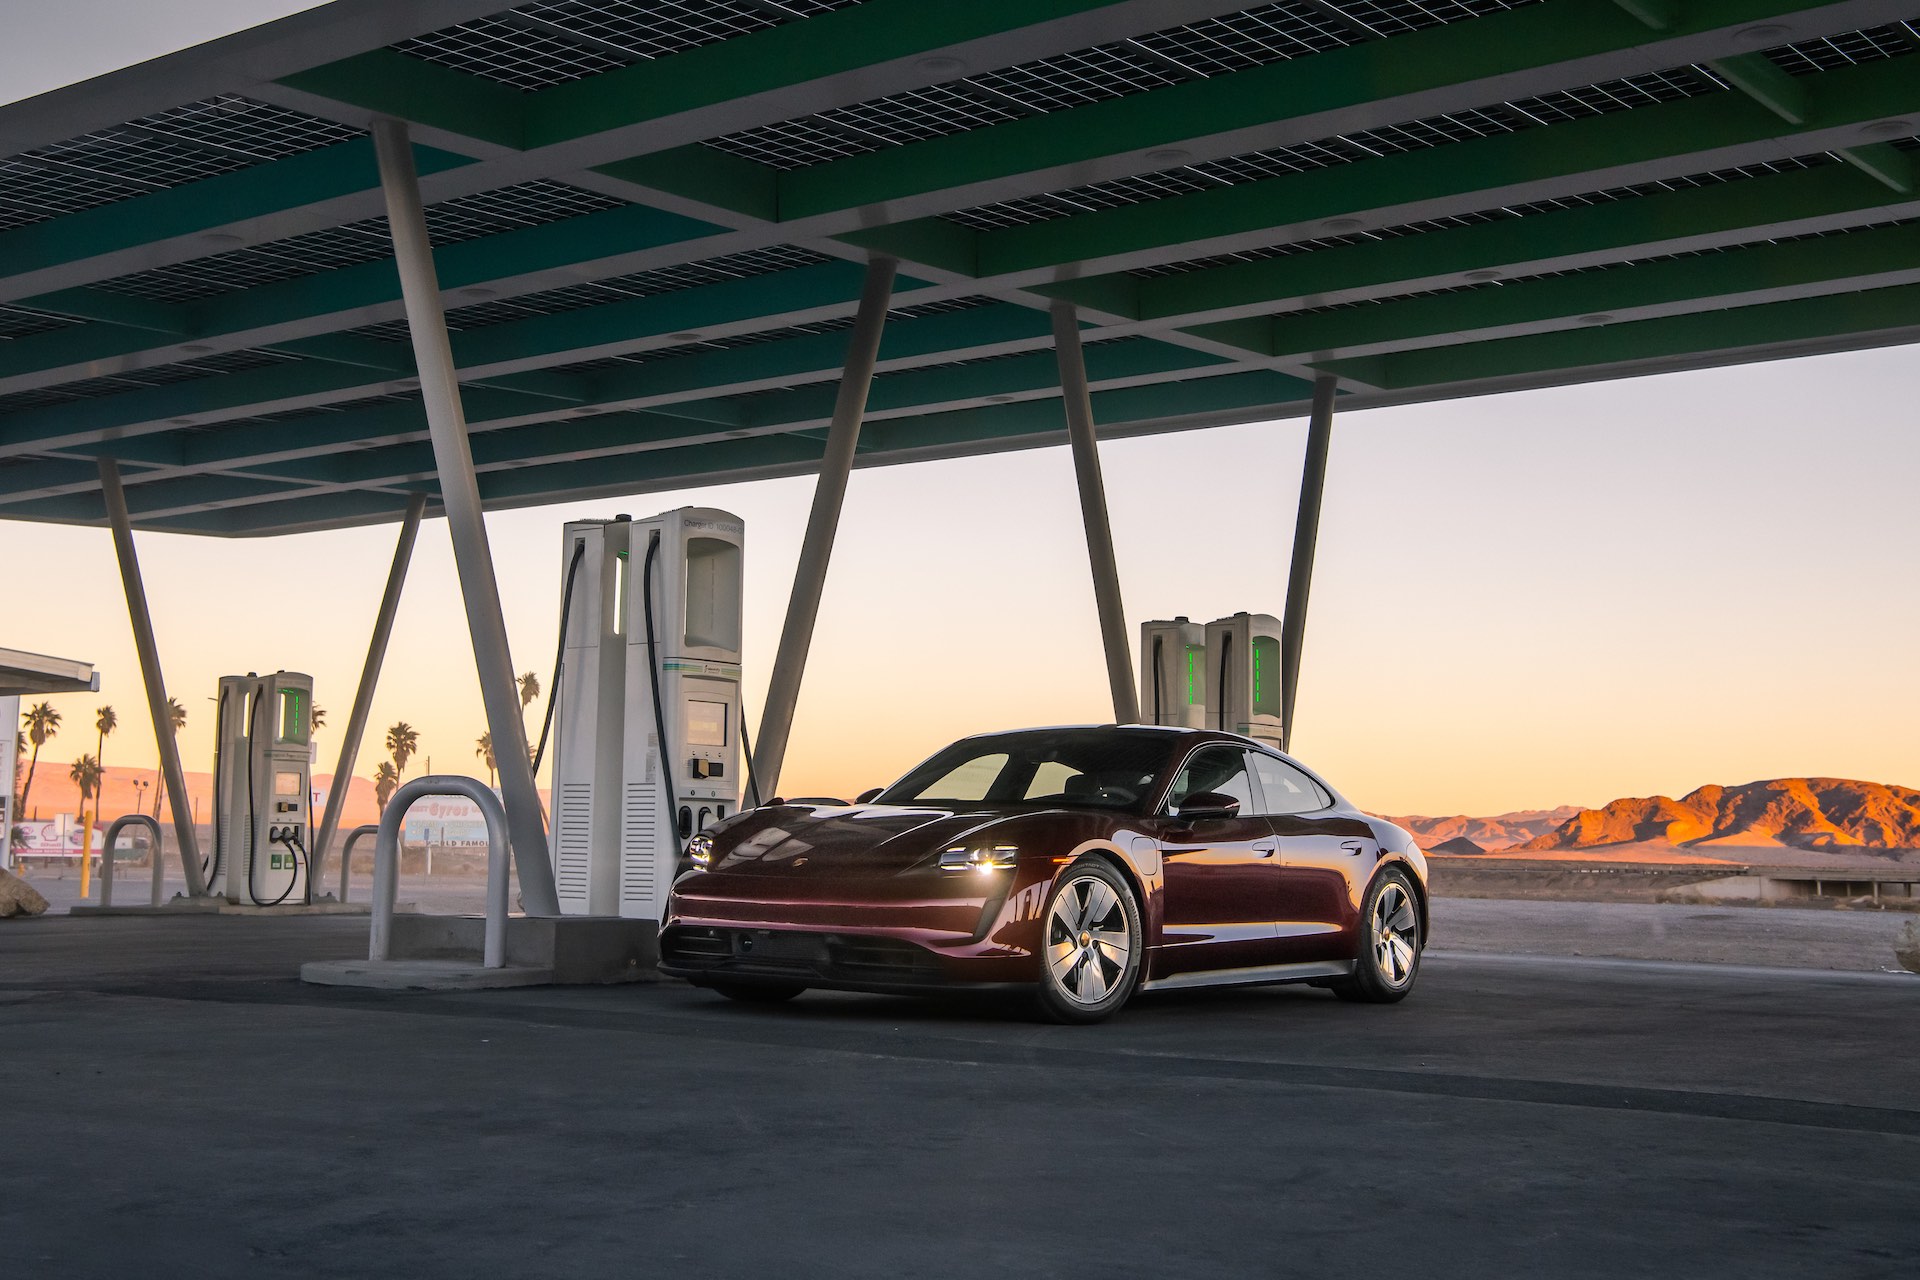 Porsche Taycan sets the Guinness World RecordTM for coast-to-coast charging